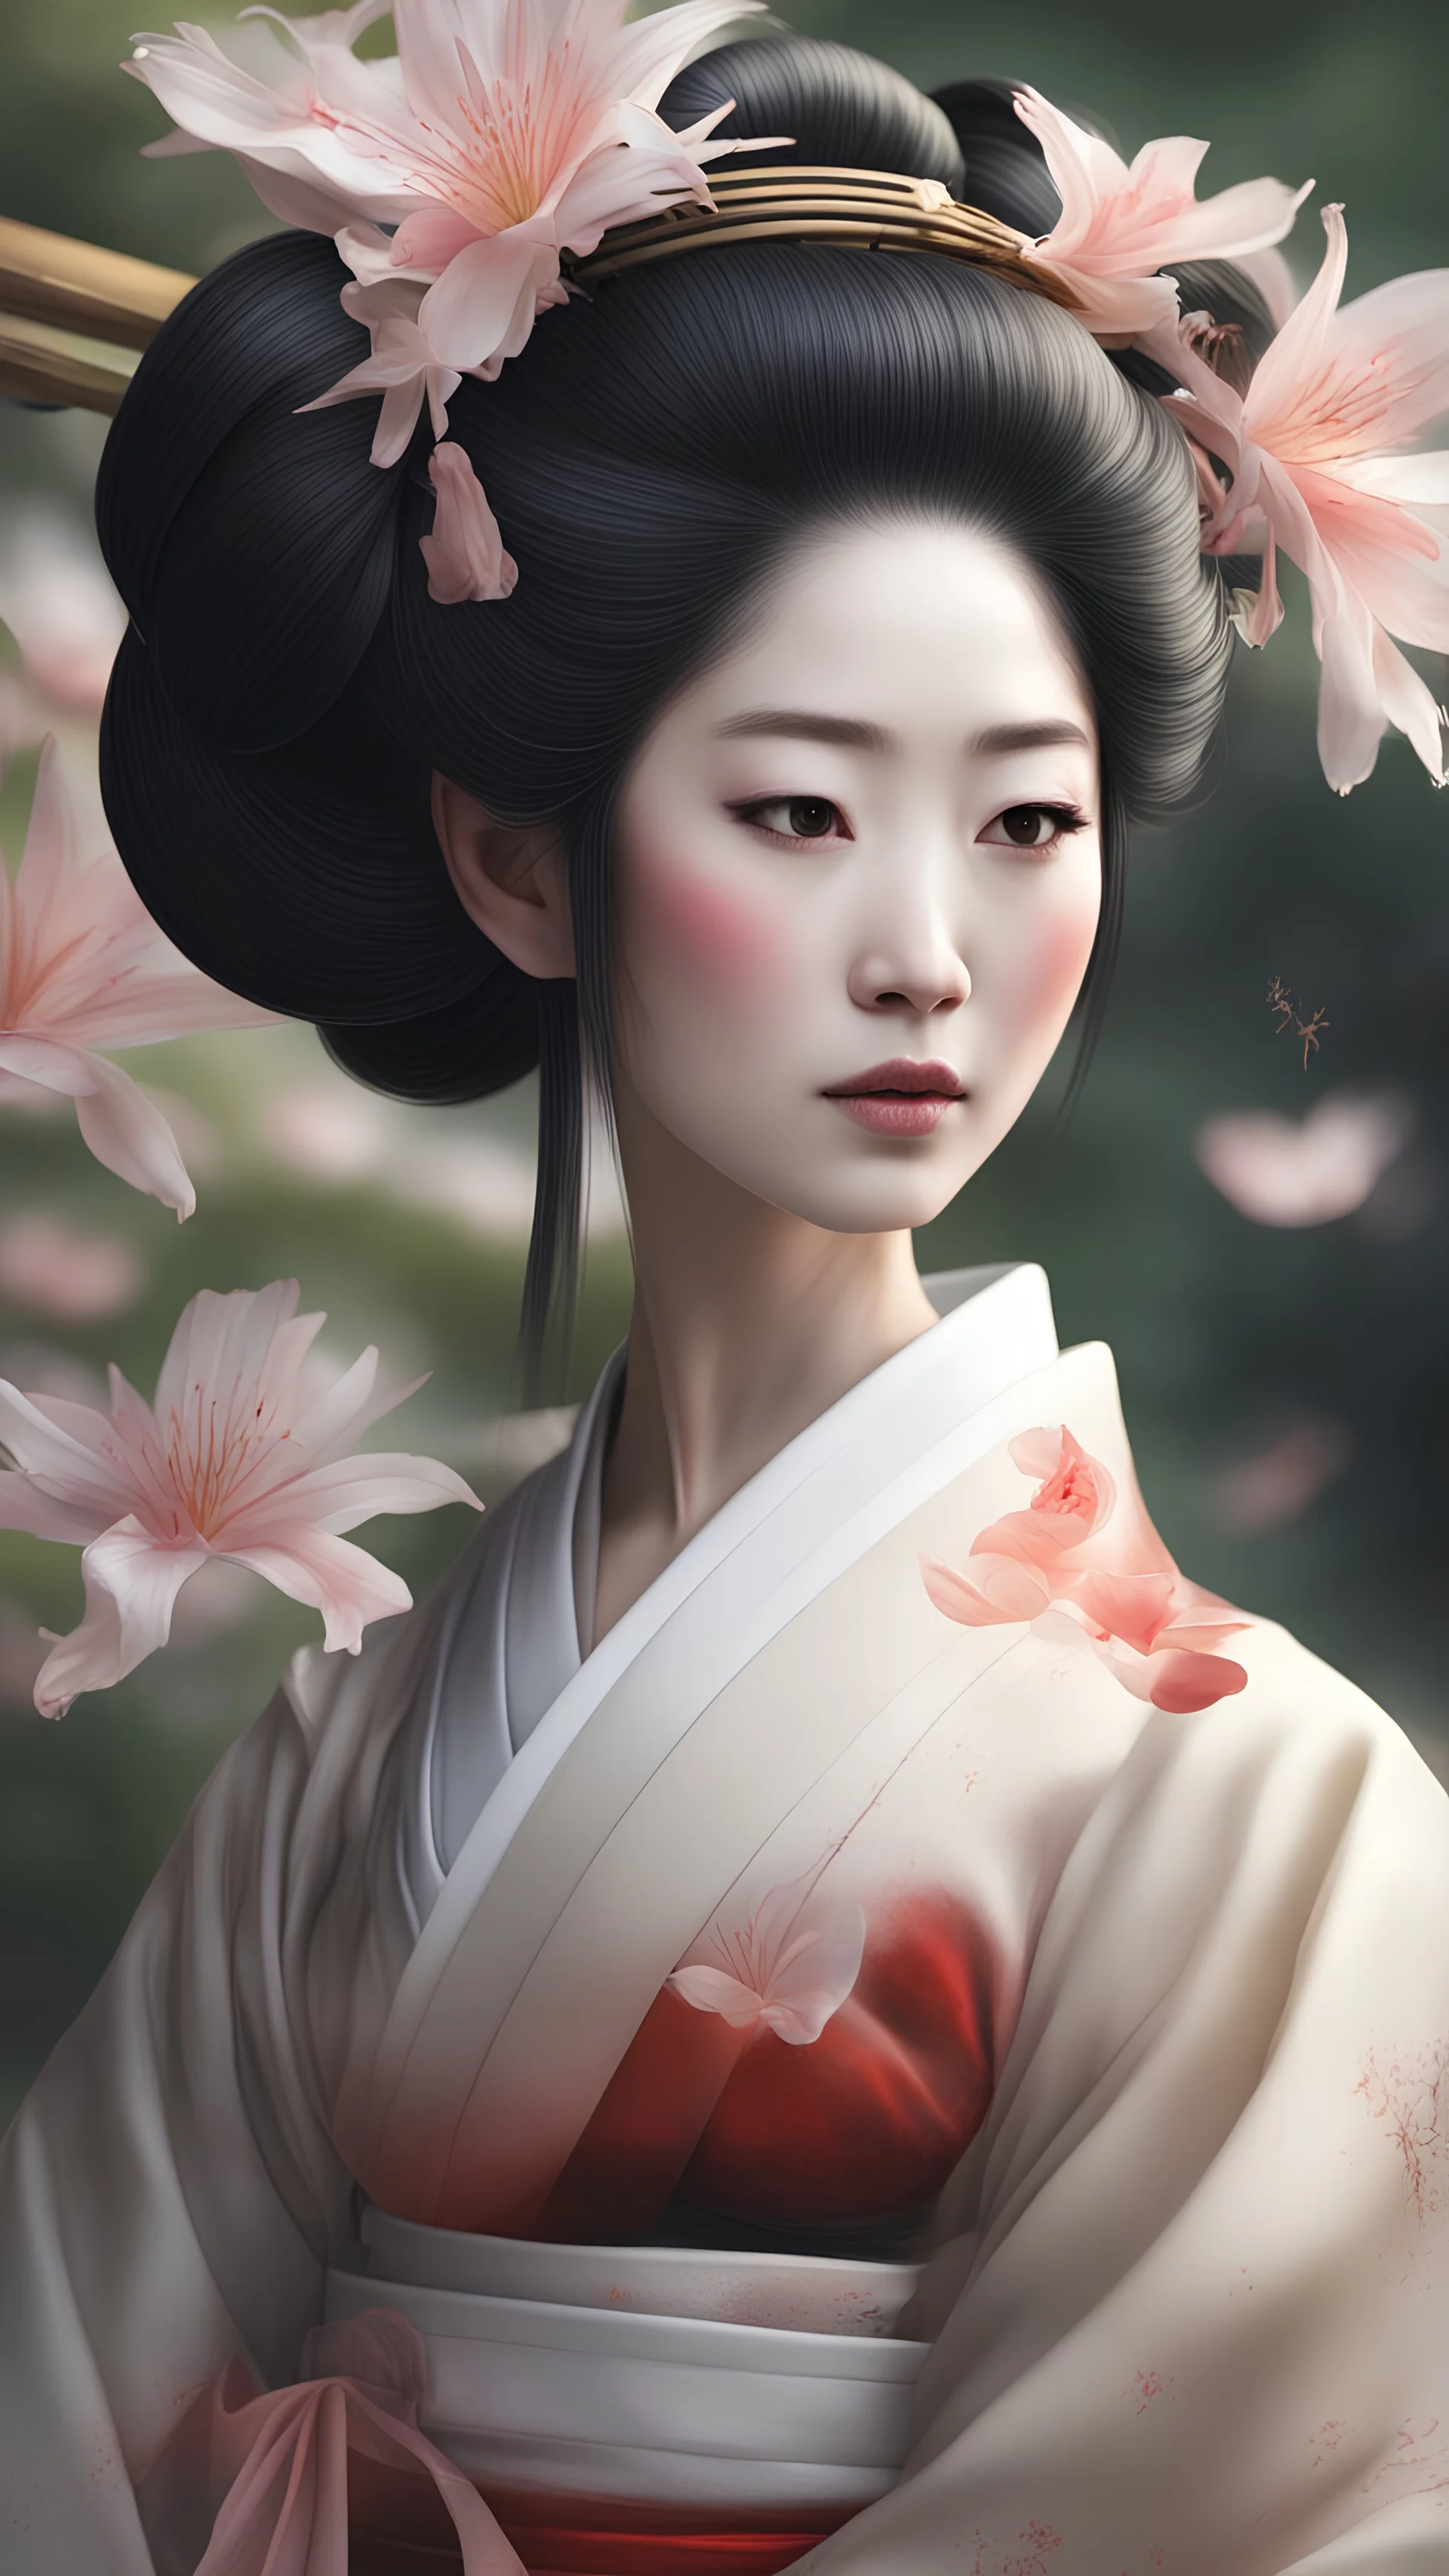 In a traditional Asian garden, Geisha Lily, with her beautiful face and flowing hanfu dress, elegantly holds a zen calligraphy brush. The serene setting showcases a stunning, photorealistic masterpiece with perfect lighting and shading.